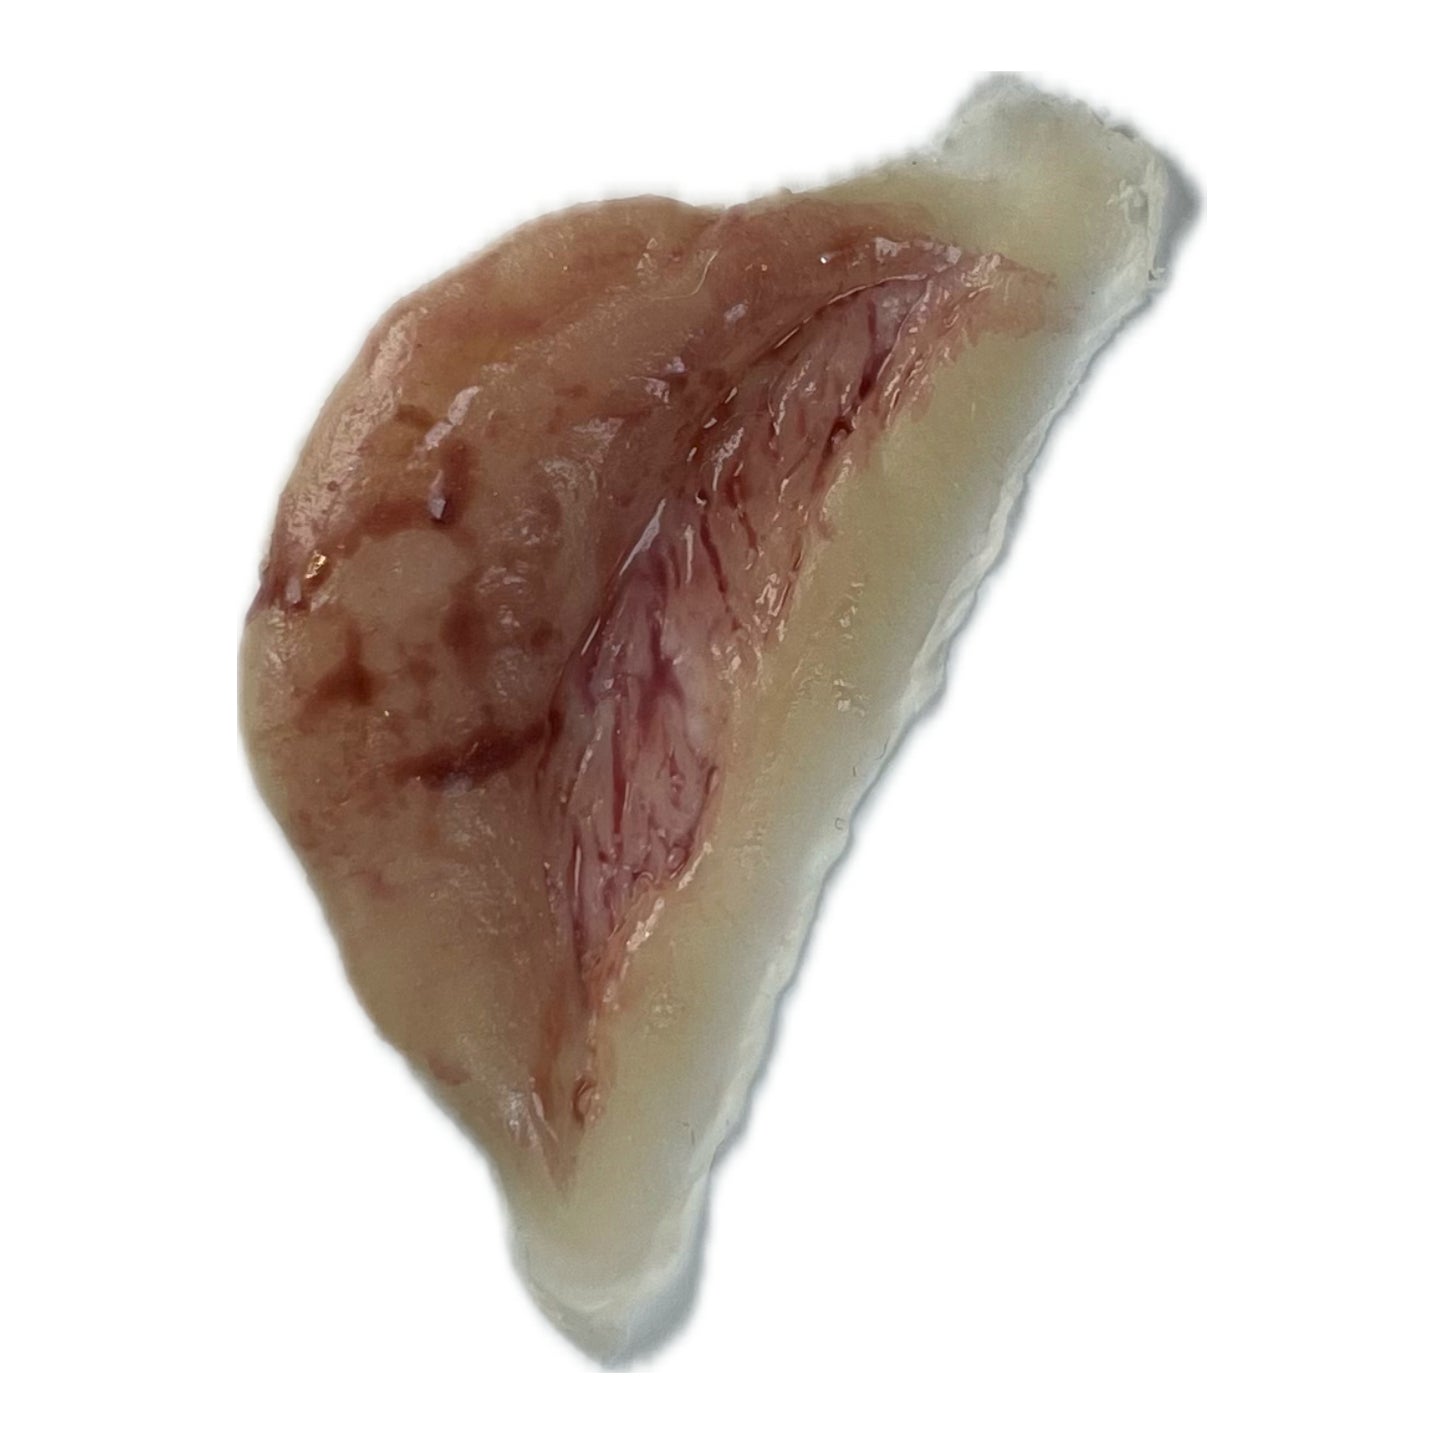 Small Slice with Large Skin Flap